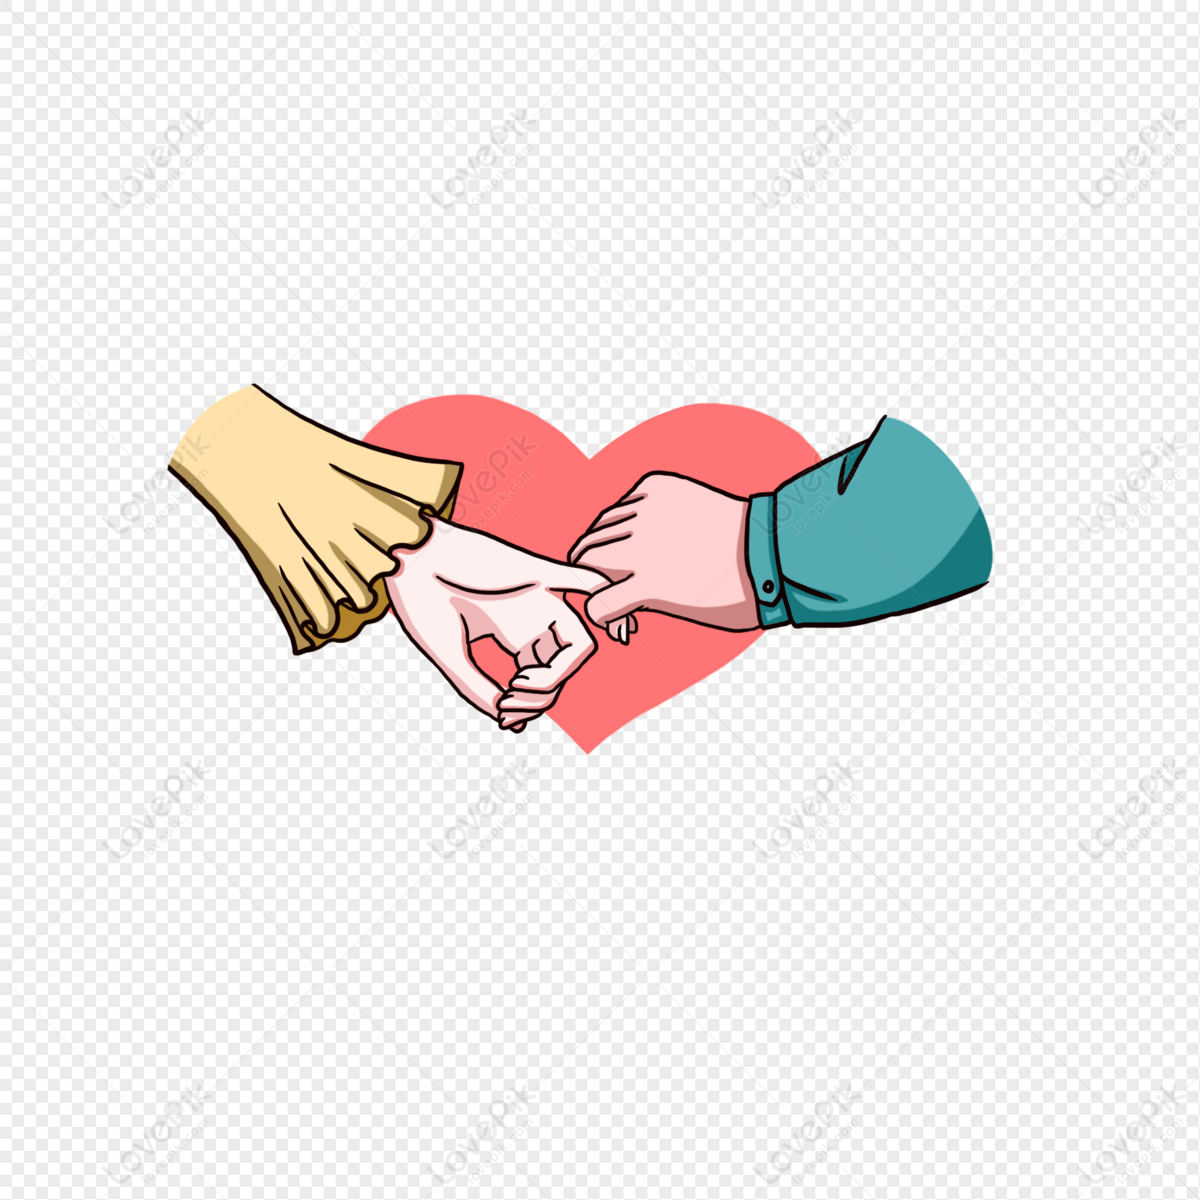 Cartoon Hand Drawn Romantic Couple Happy Holding Hands PNG Image Free  Download And Clipart Image For Free Download - Lovepik | 401272481